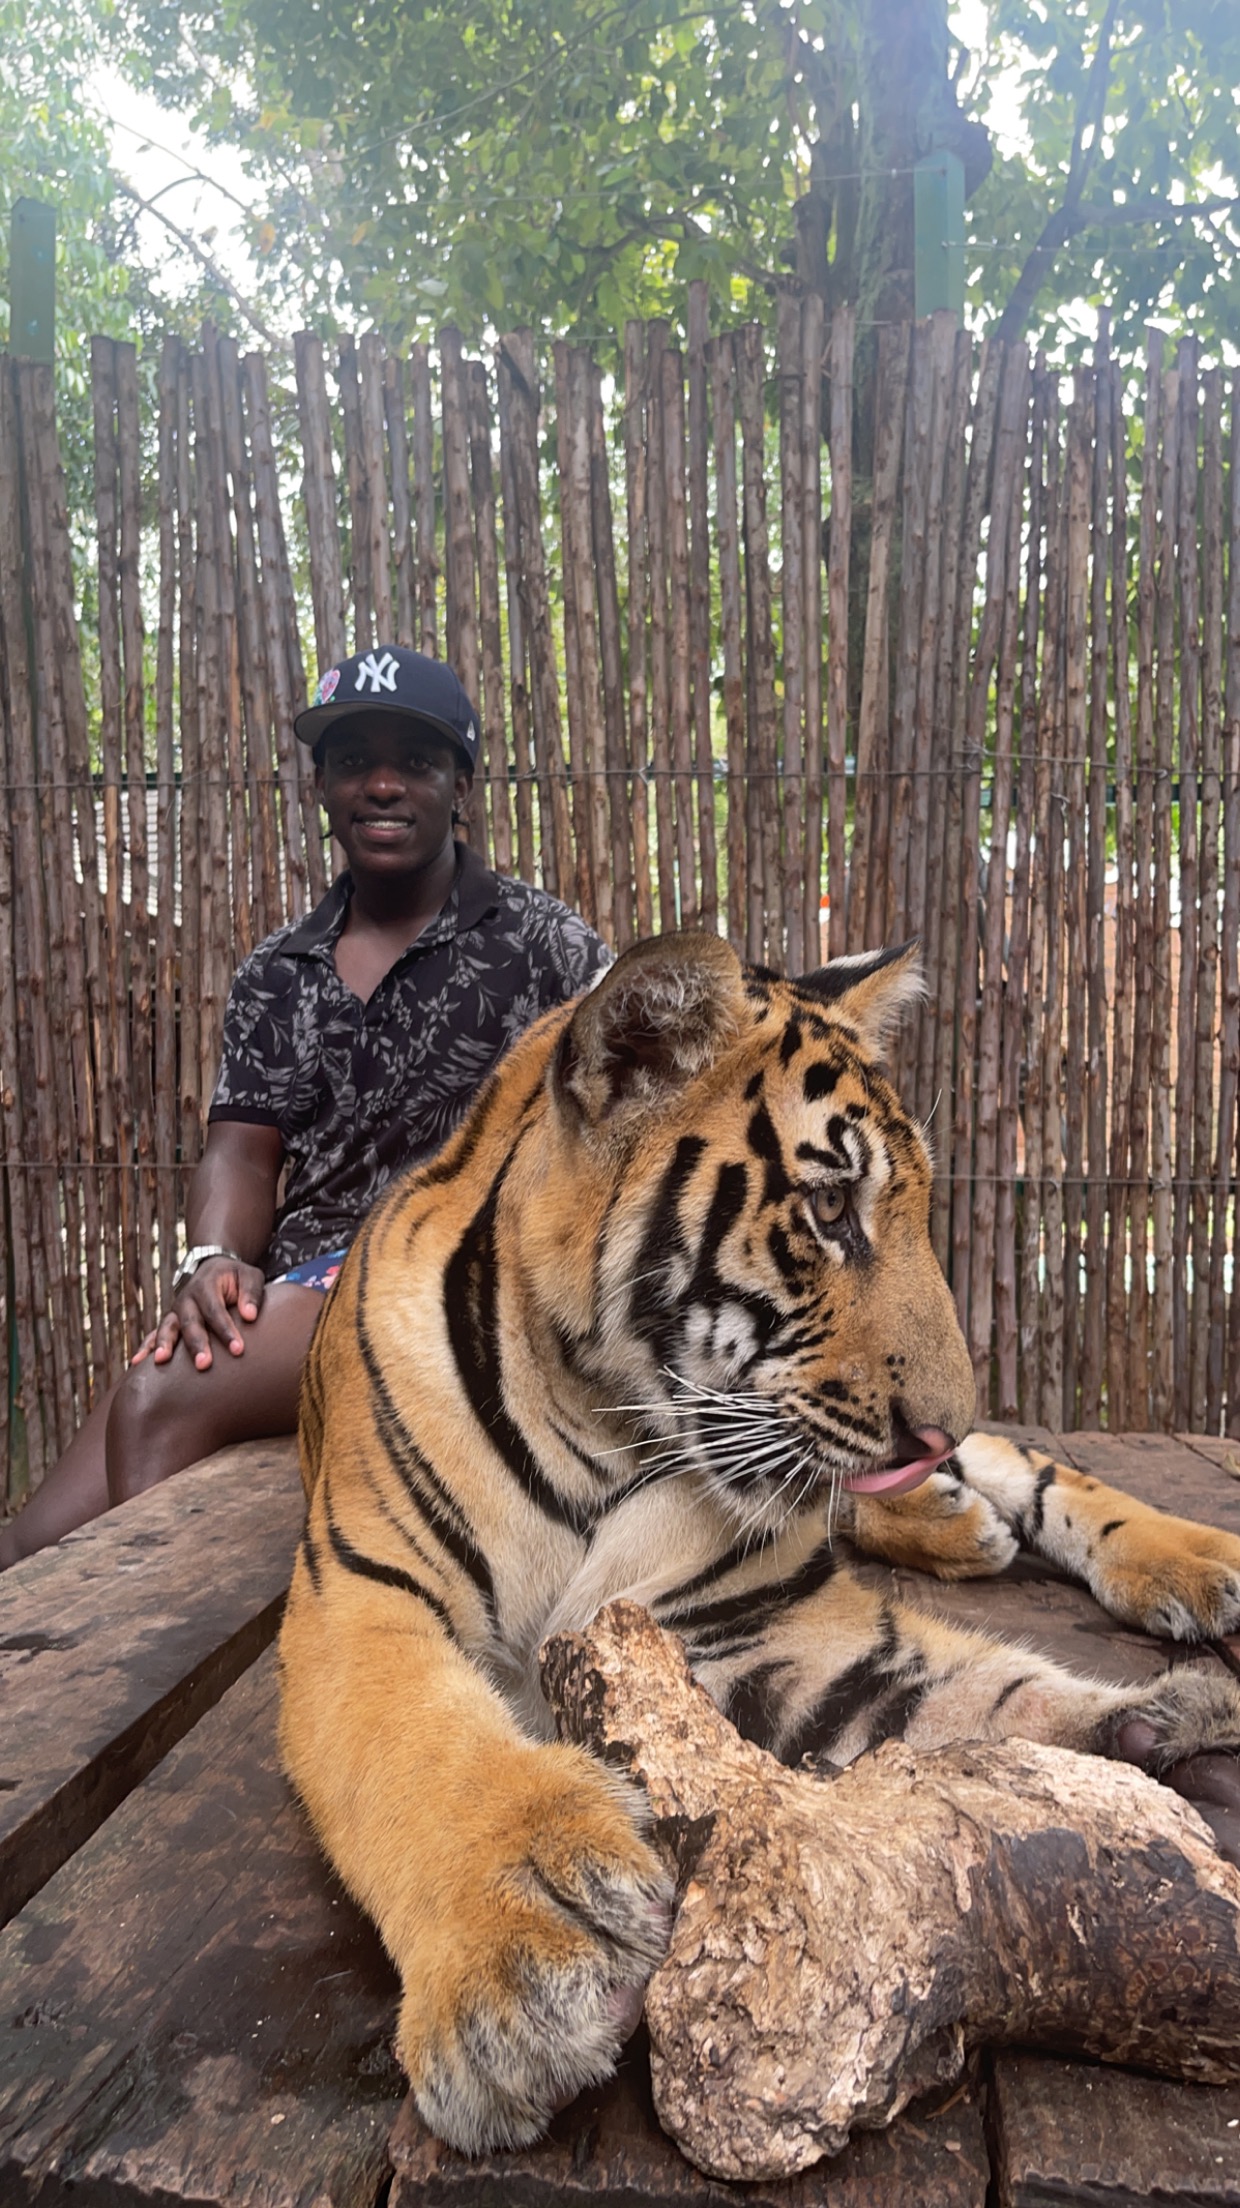 Petting a tiger in Thailand.